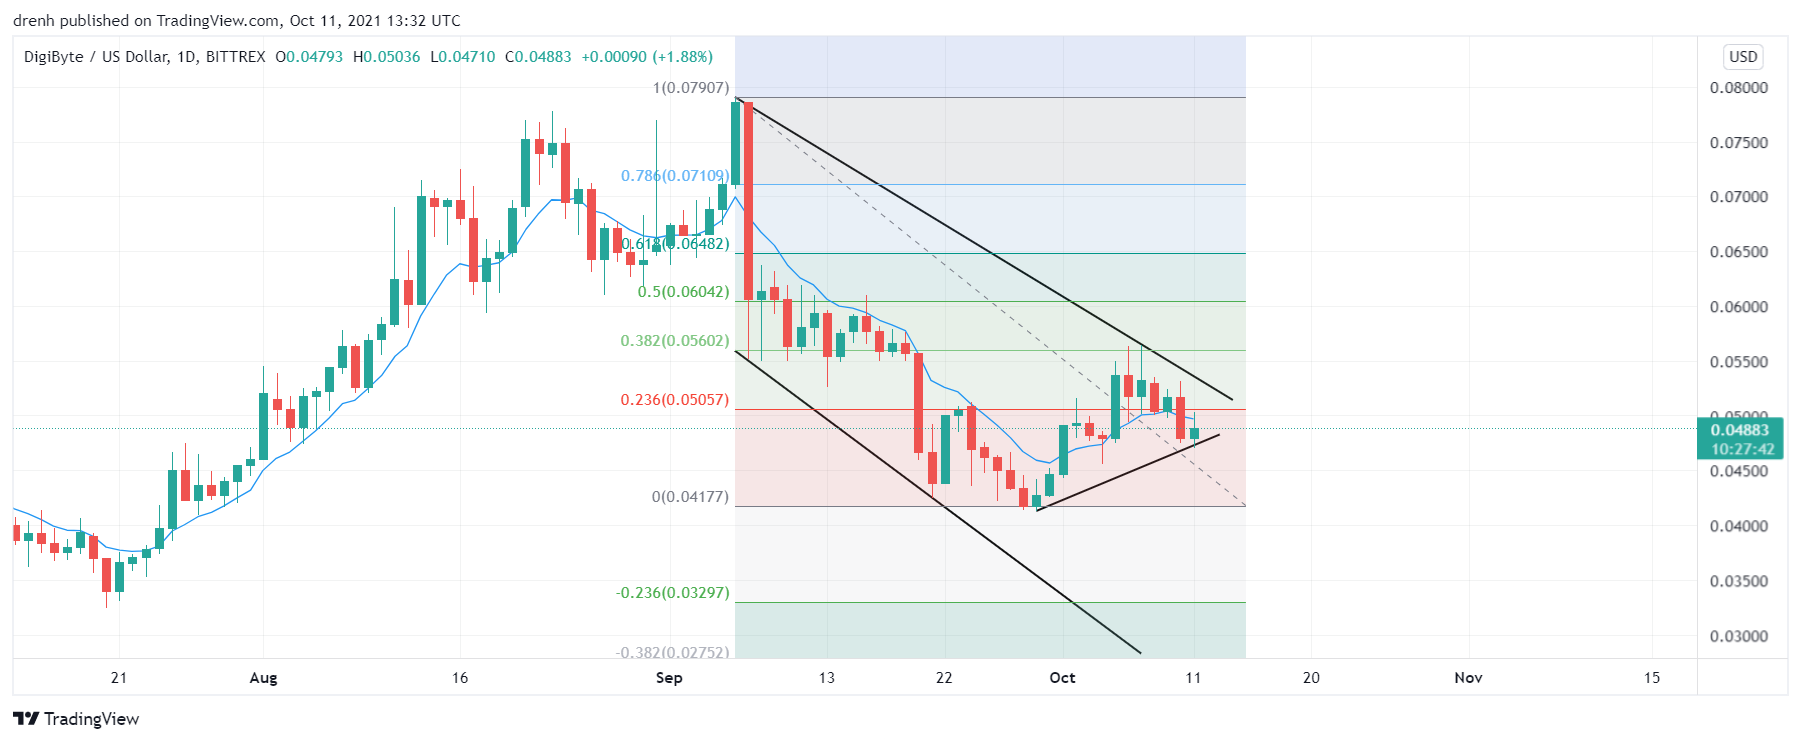 DigiByte Price Prediction October 2021: Will DGB Reach $0.50 In October?